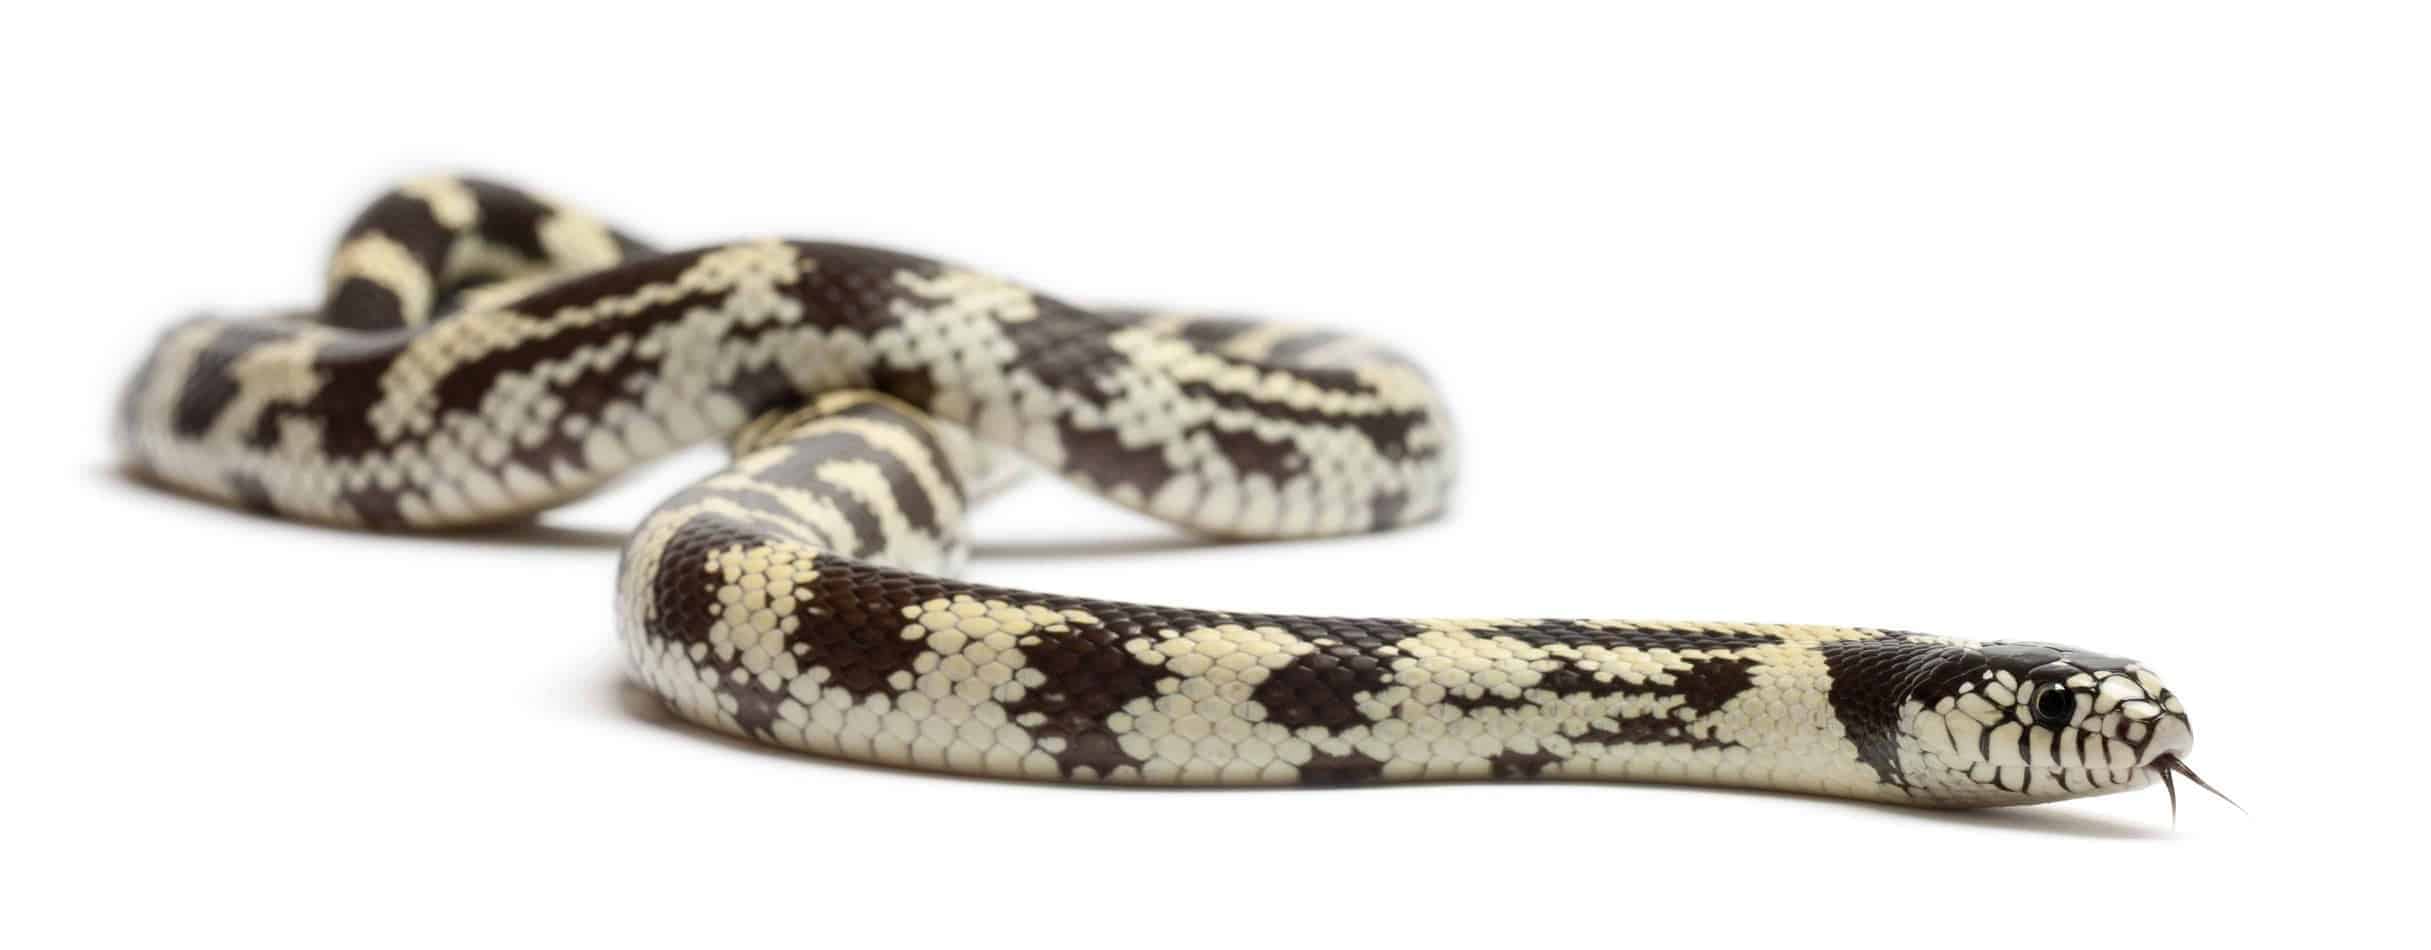 kingsnake Kingsnakes as Pets: A Complete Guide With Pictures